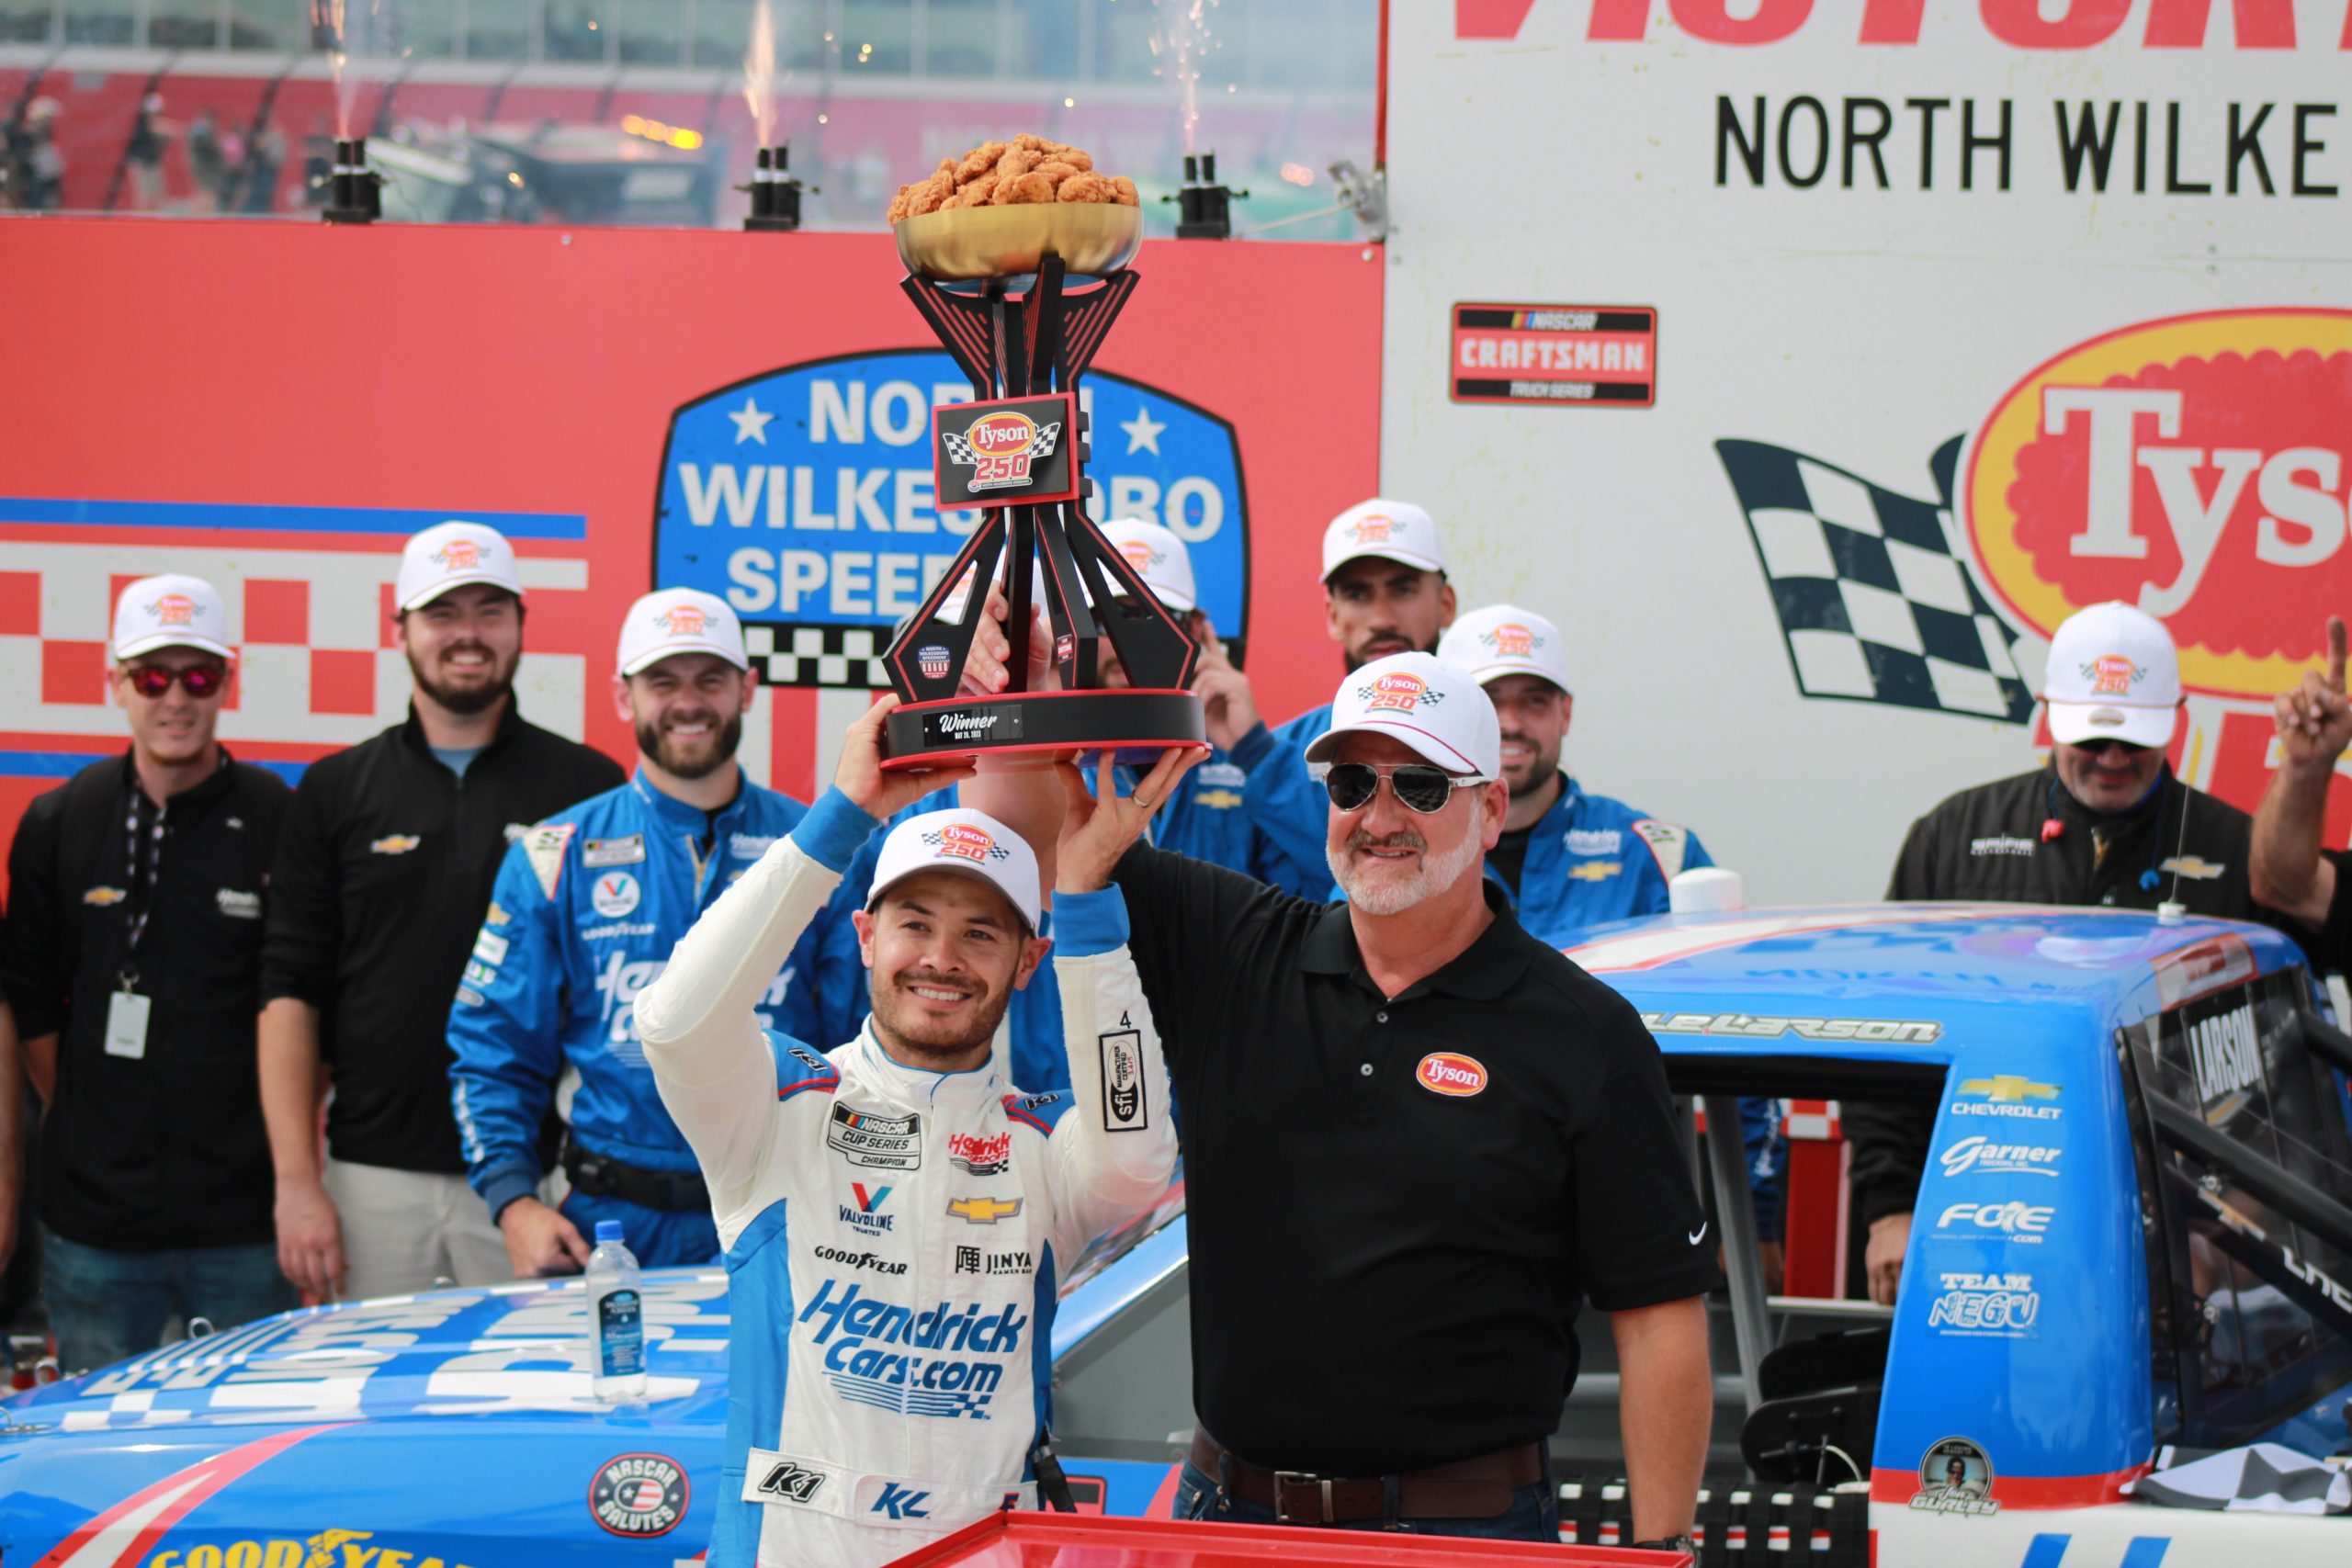 Kyle Larson scored an epic cup of Tyson popcorn nuggets trophy in all of motorsports at North Wilkesboro Speedway. (Photo: Trish McCormack | The Podium Finish)